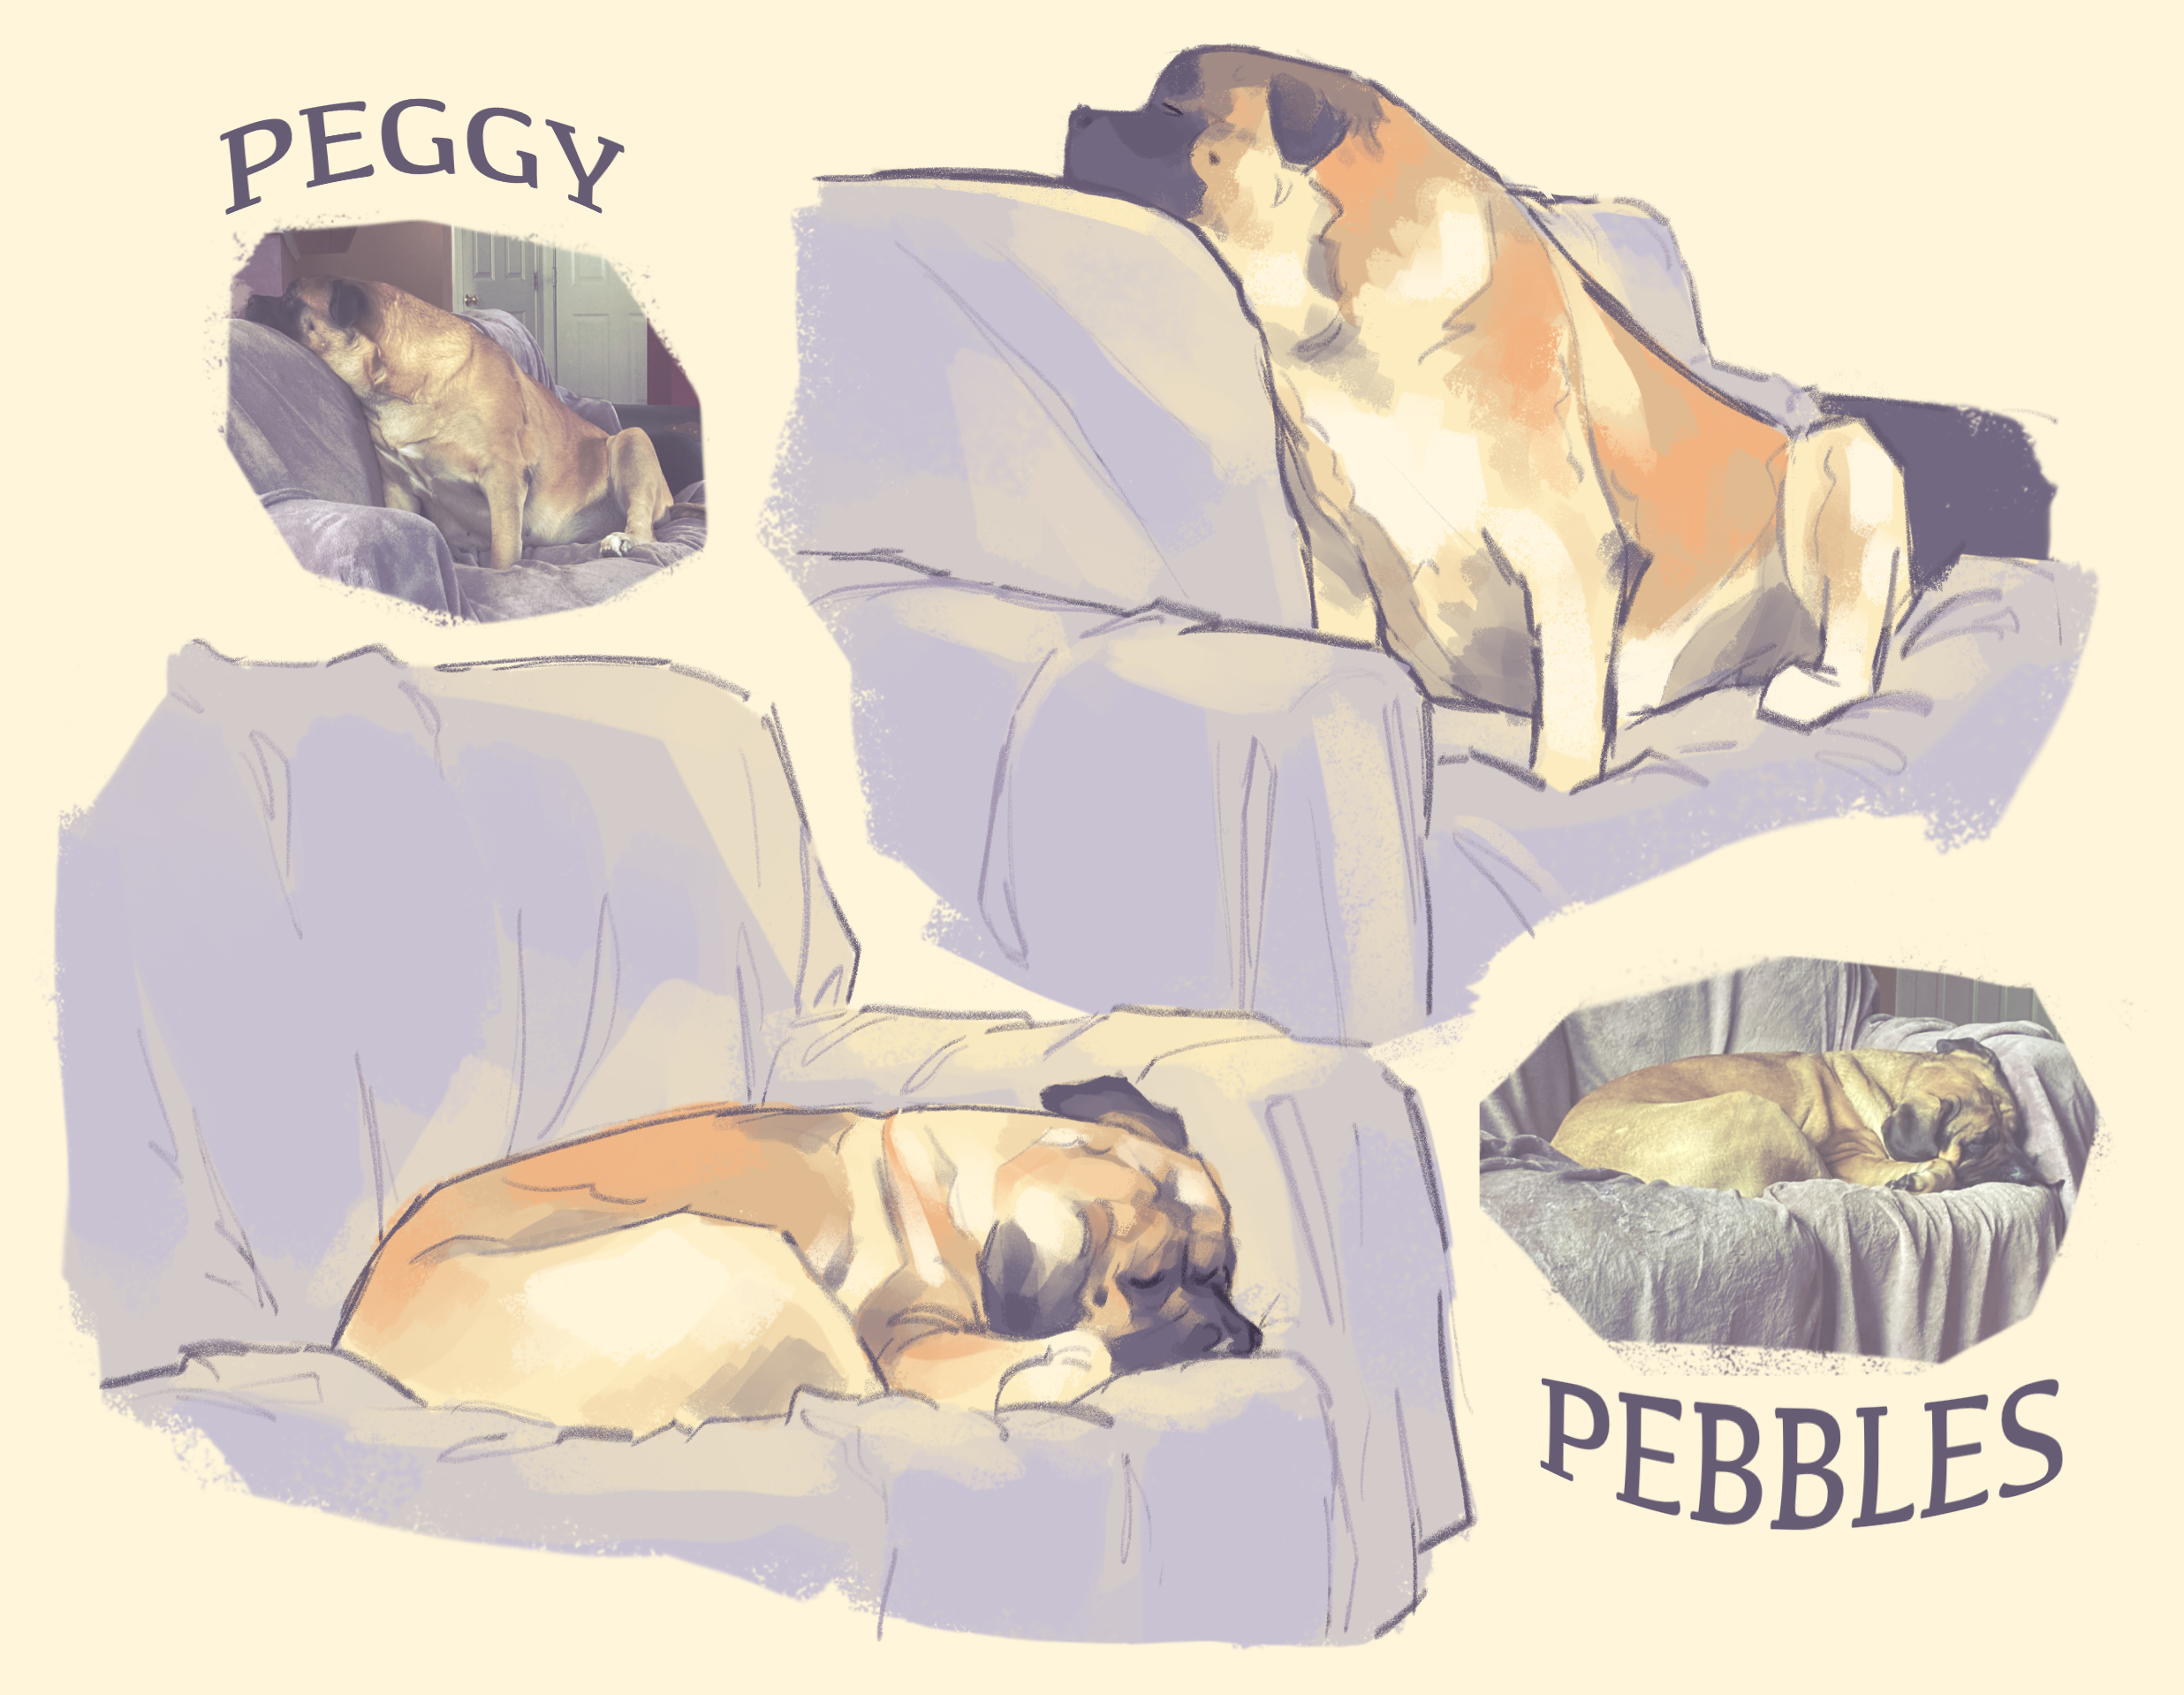 Peggy and Pebbles